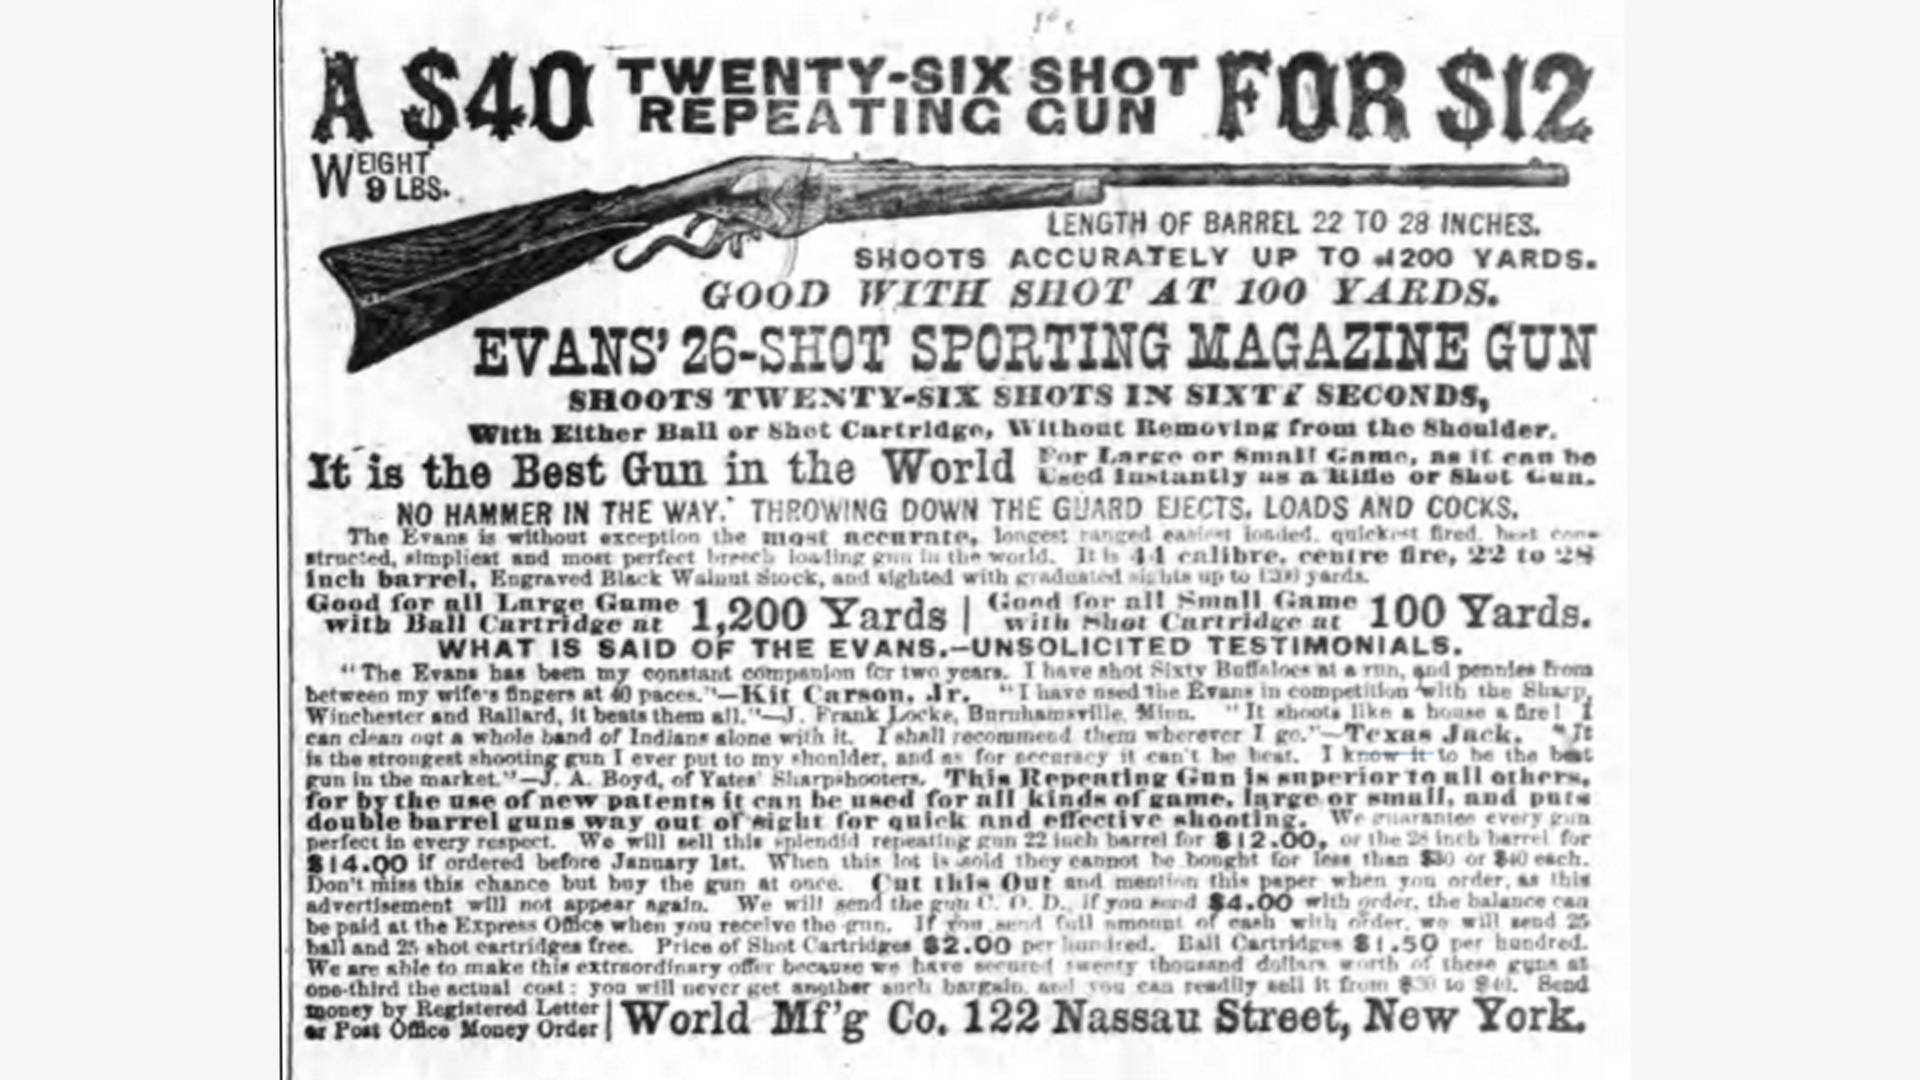 Evans Repeating Rifle classic advertisement